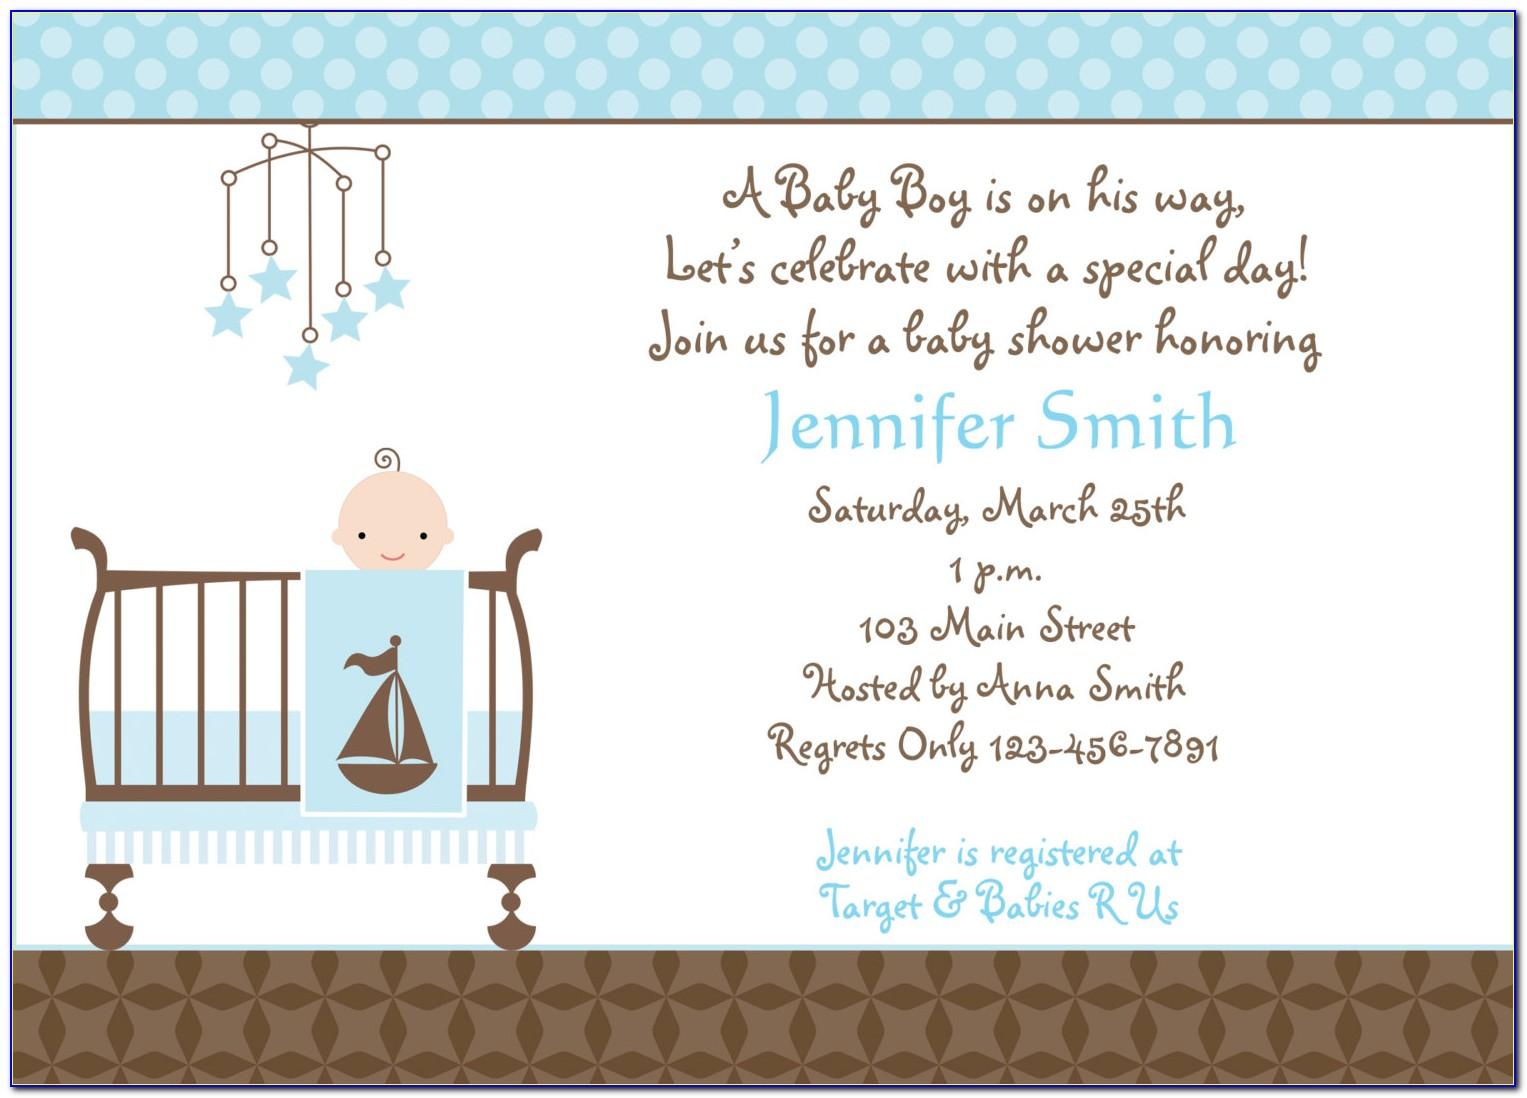 Baby Boy Shower Invitations Templates Free Download